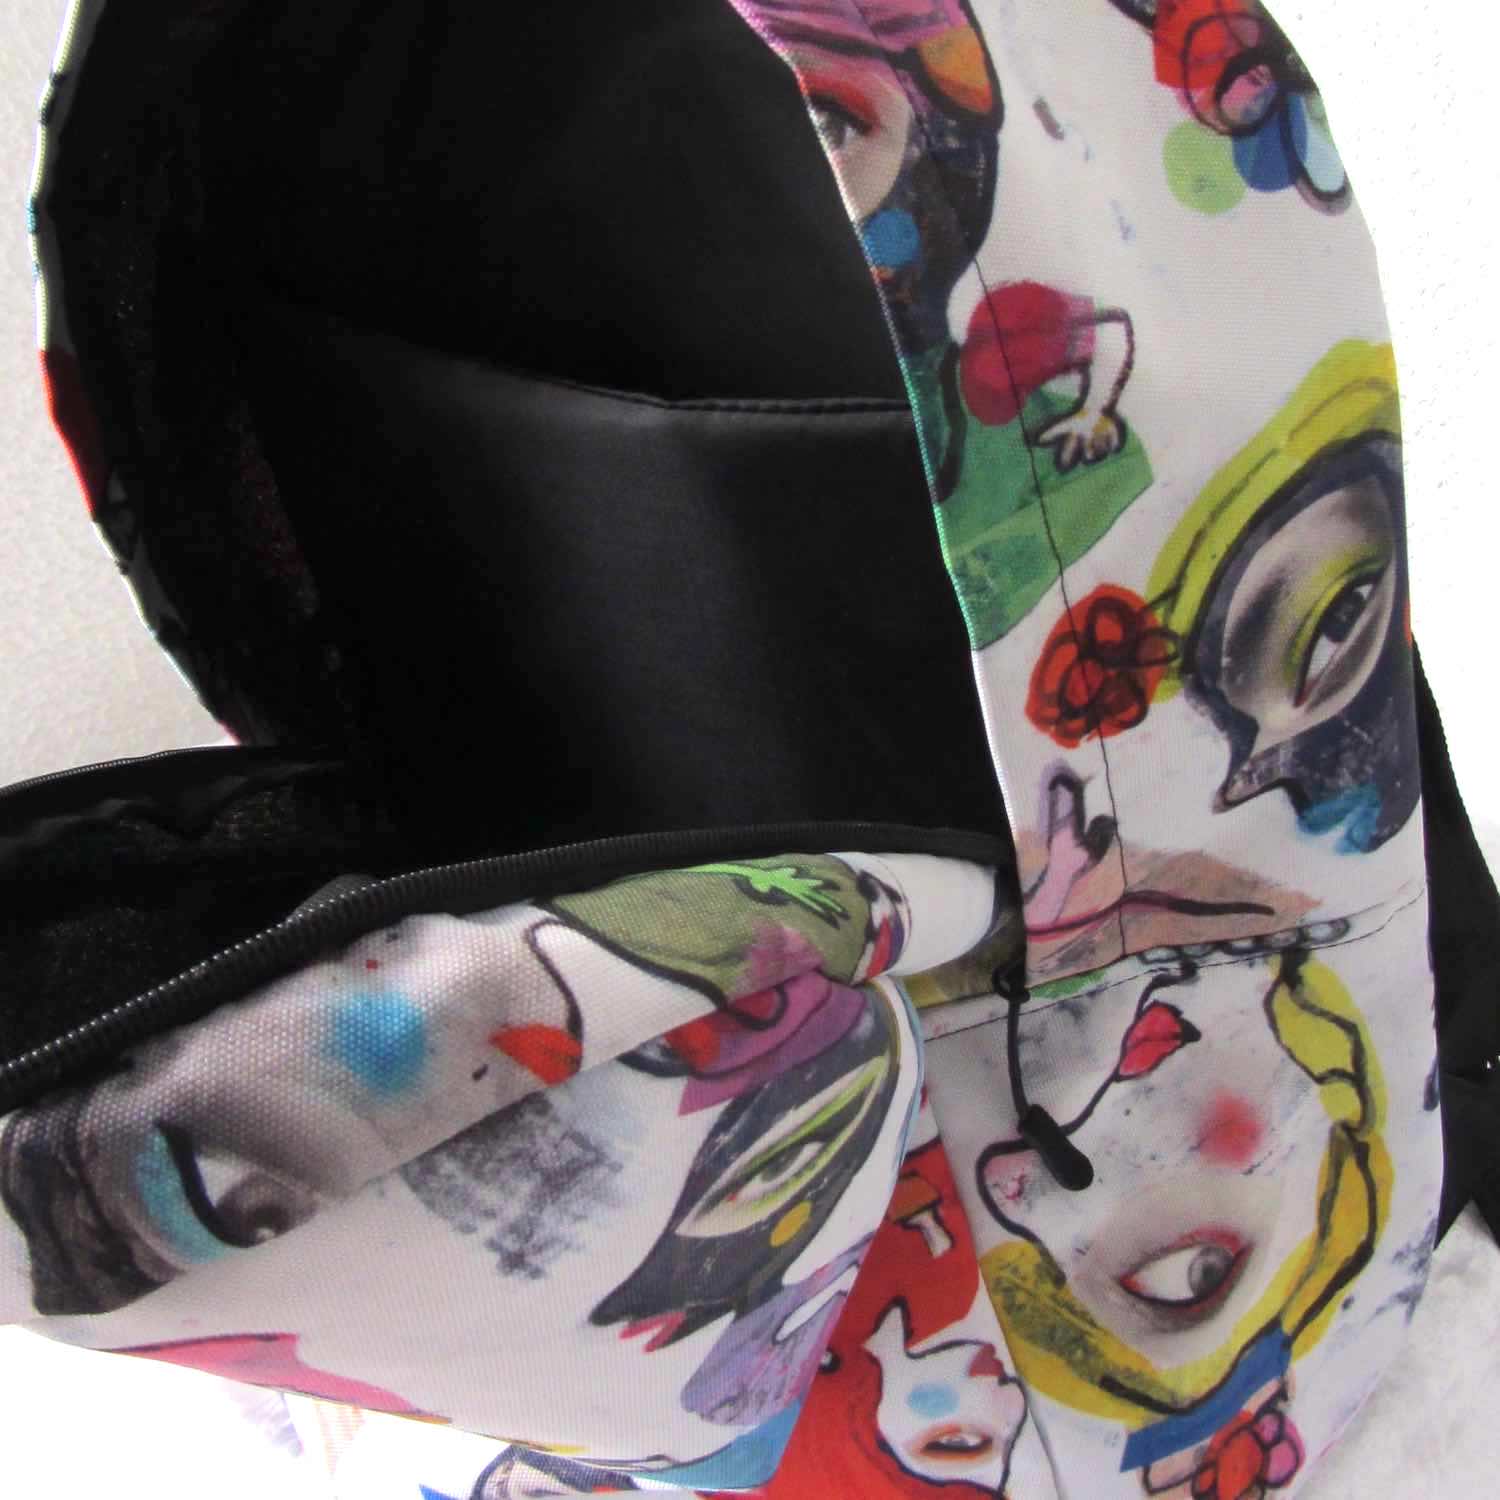 Graphic minimal design city style backpack with fun multicolor Fab Ladies print and black interior padded pocket.